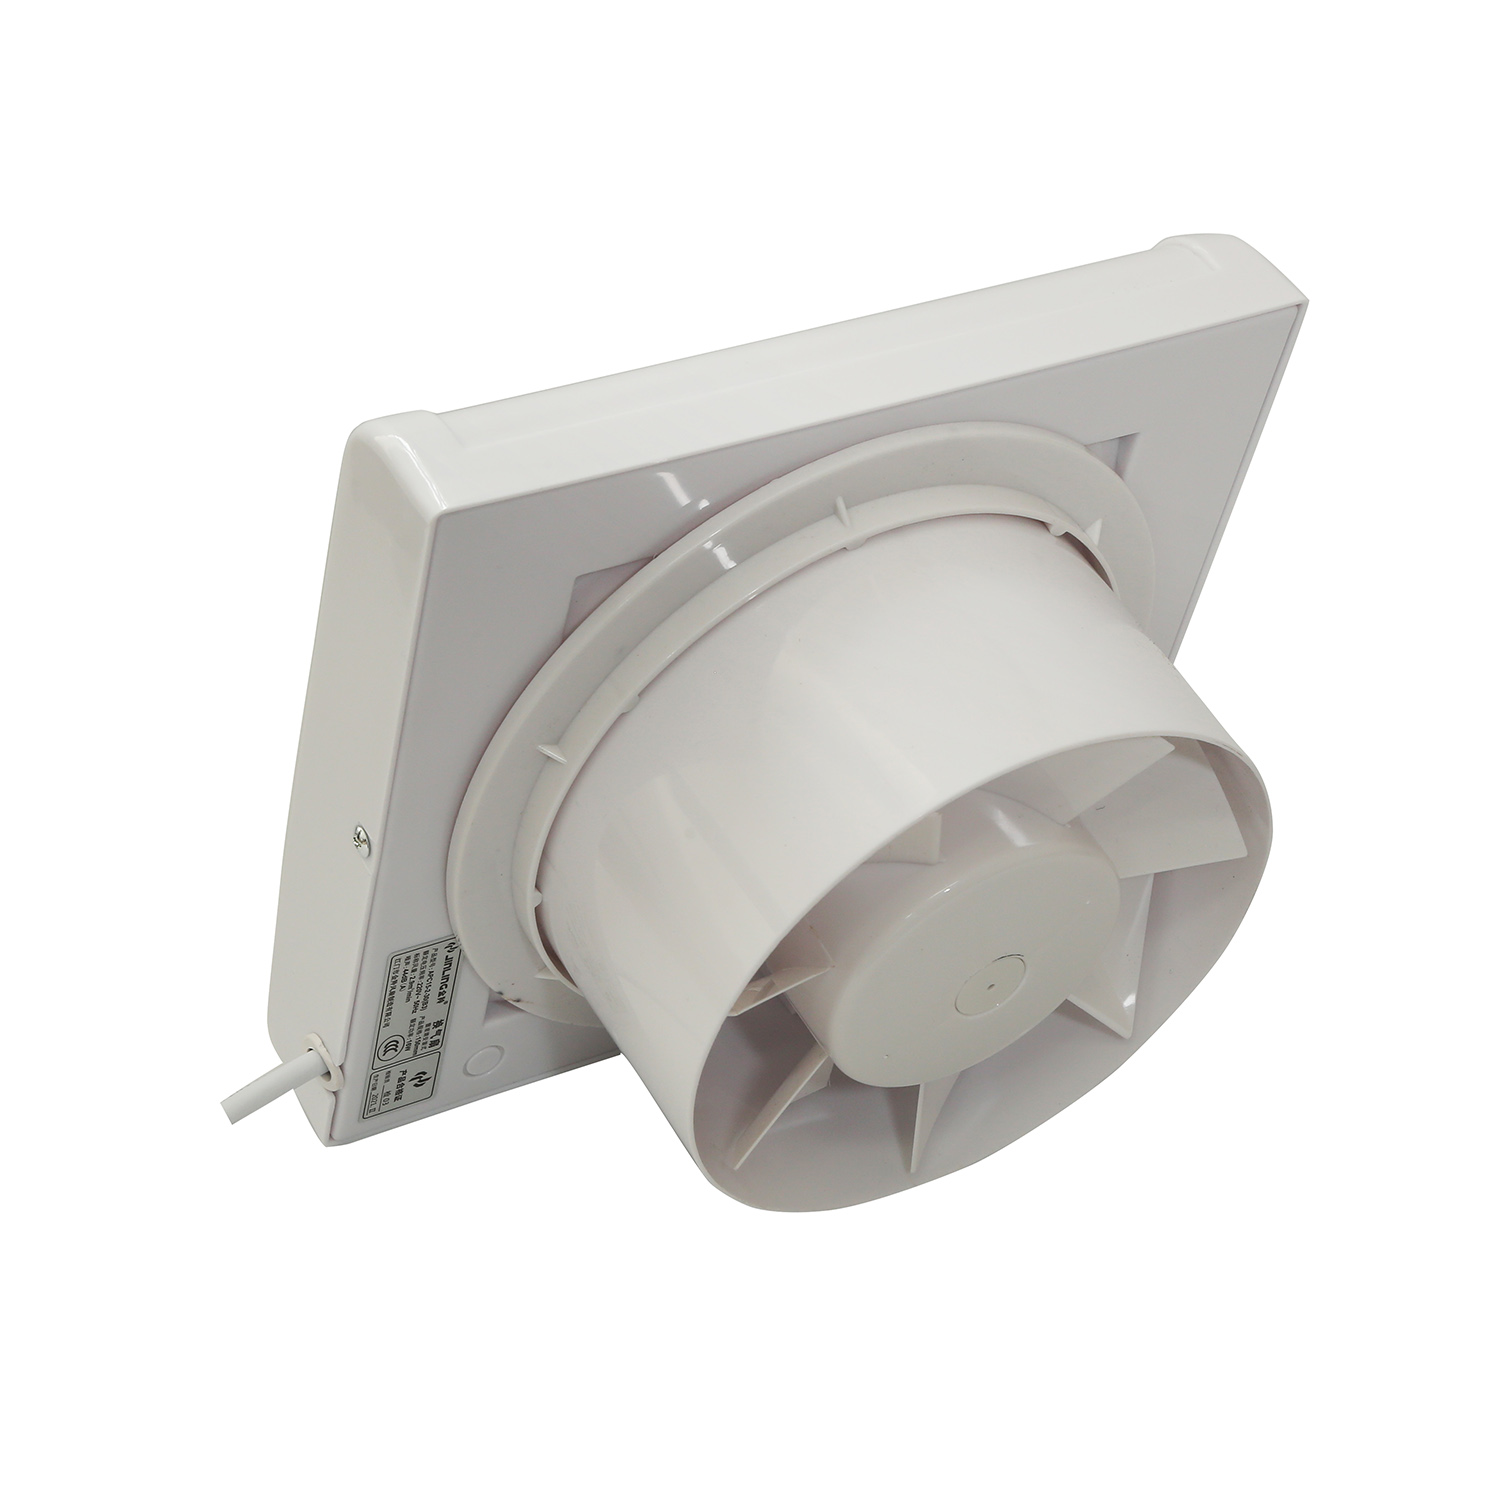 Extractor Ventilation Exhaust Fan with Shutter for Bathroom 4"6" Window Wall Mount 